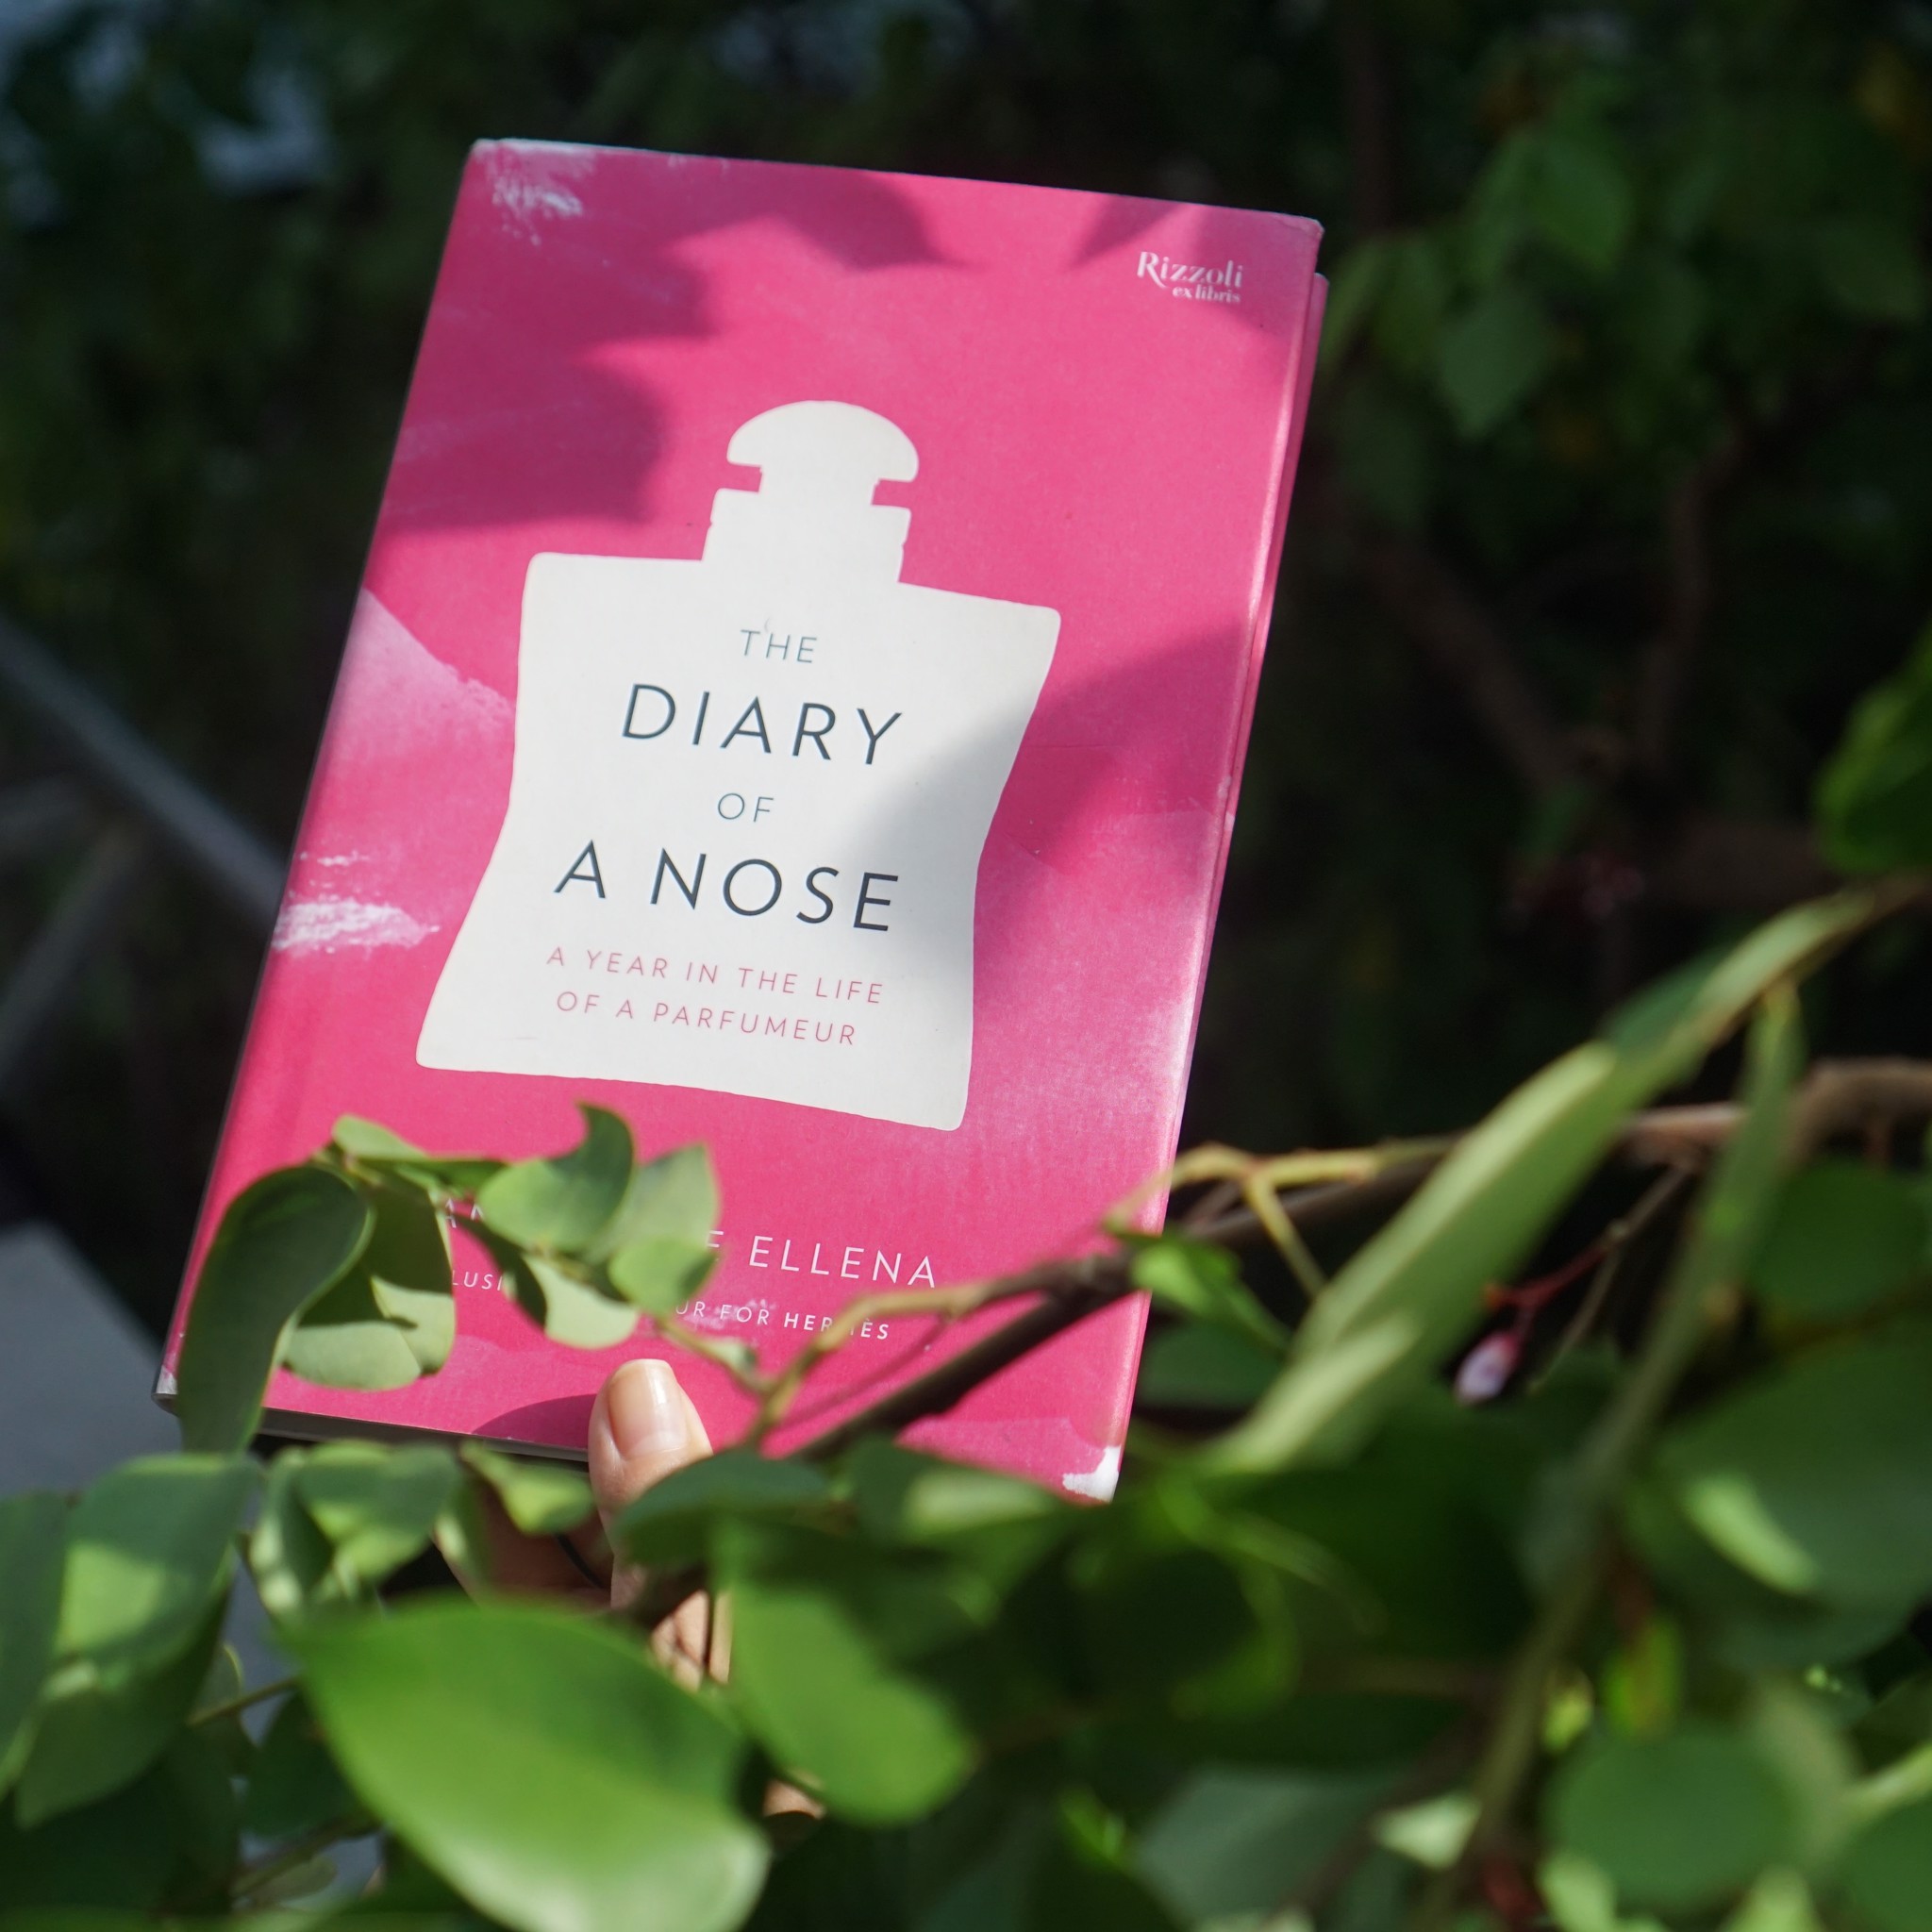 [PART 1] BOOK REVIEW: The Diary of A Nose - Nhật ký của một Perfumer